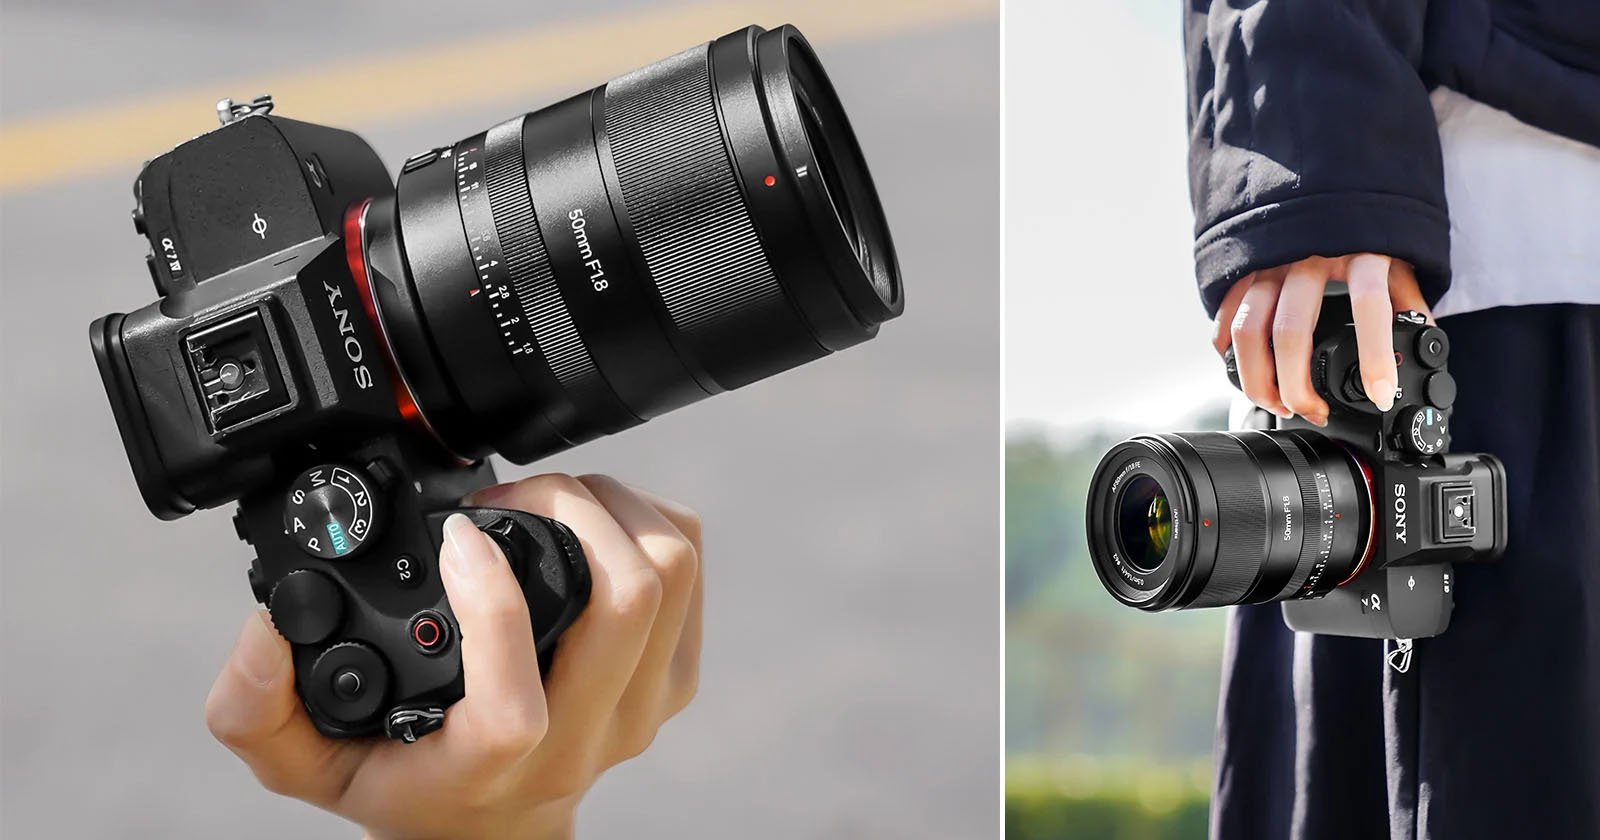 7Artisans’ 50mm f/1.8 Prime Is an Affordable Choice for Nikon Z Cameras